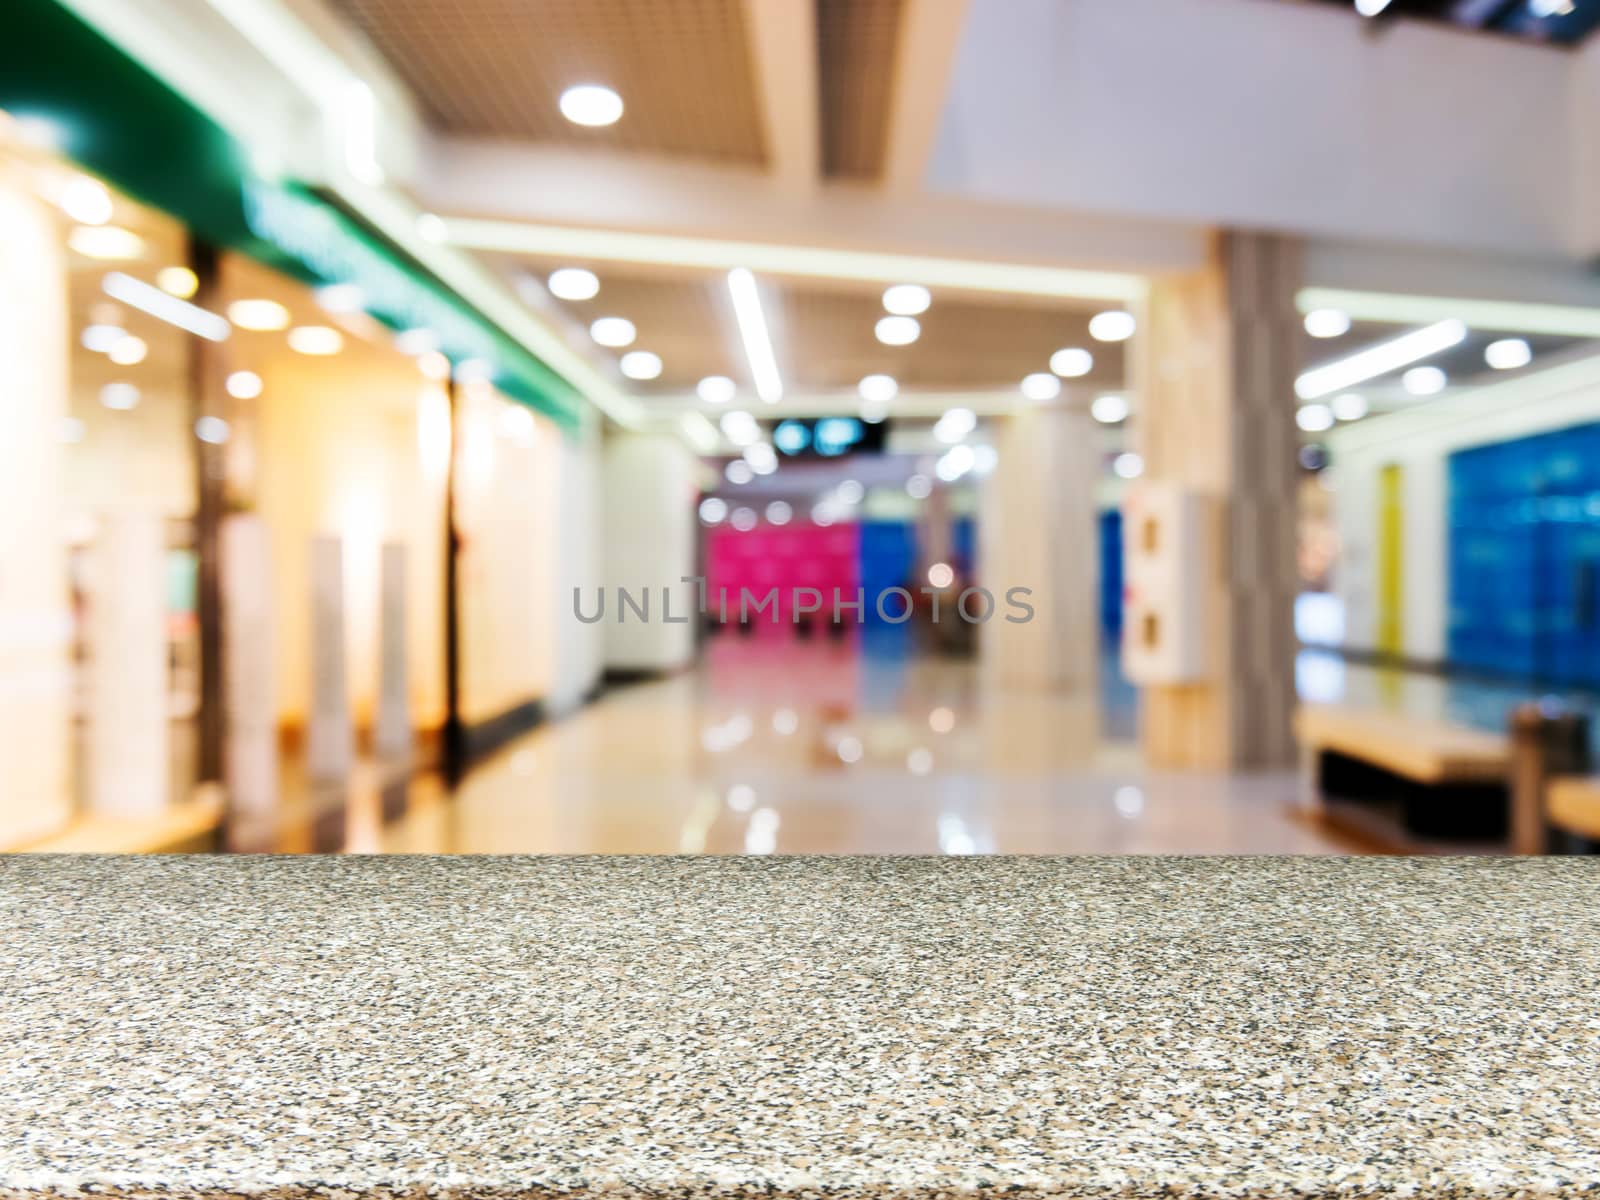 Marble empty table in front of blurred mall by fascinadora